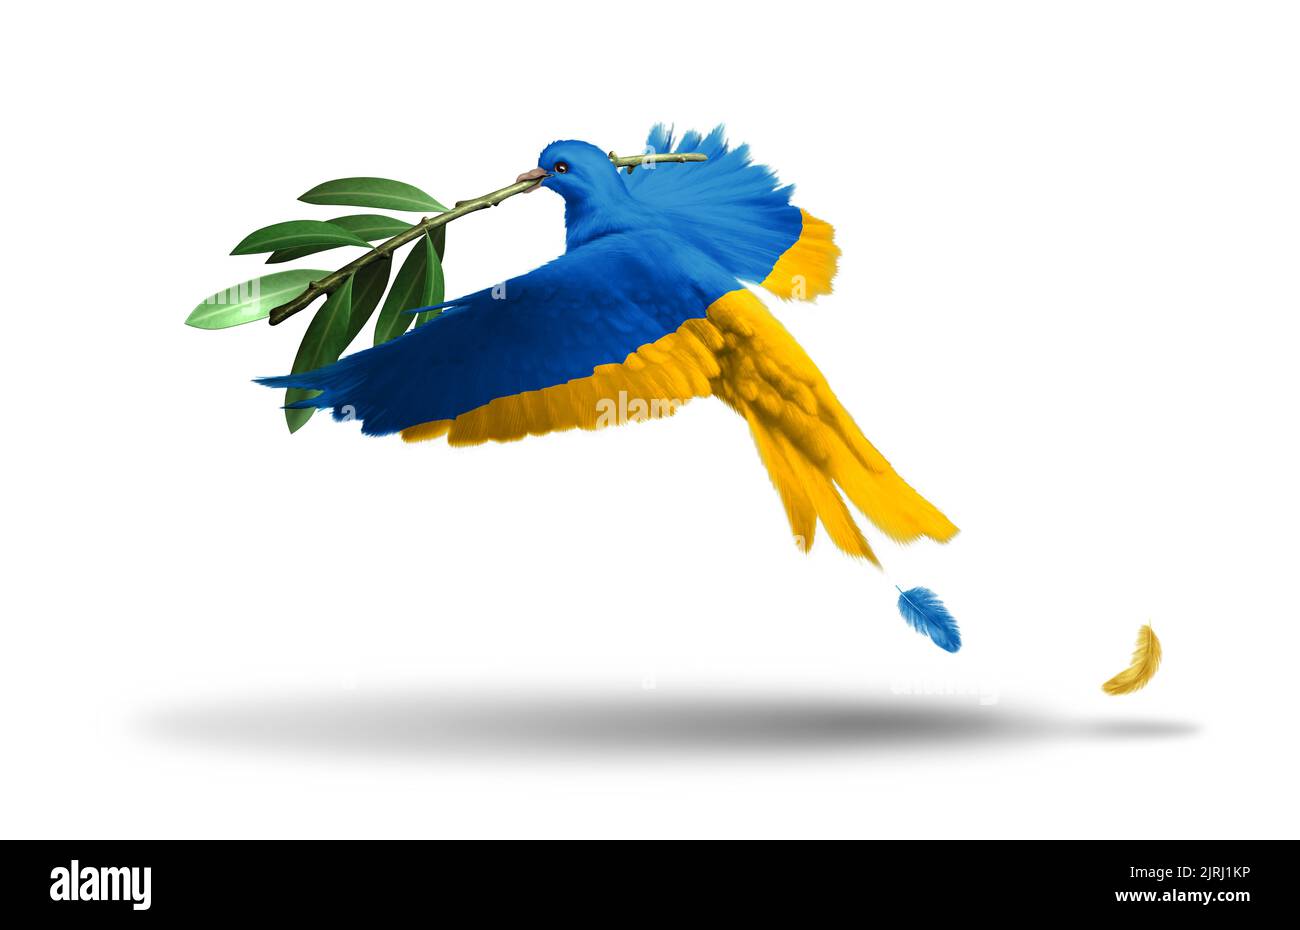 Ukrainian freedom symbol and Ukraine peace as European partnership with a dove in the colors of the flag holding an olive branch expressing. Stock Photo